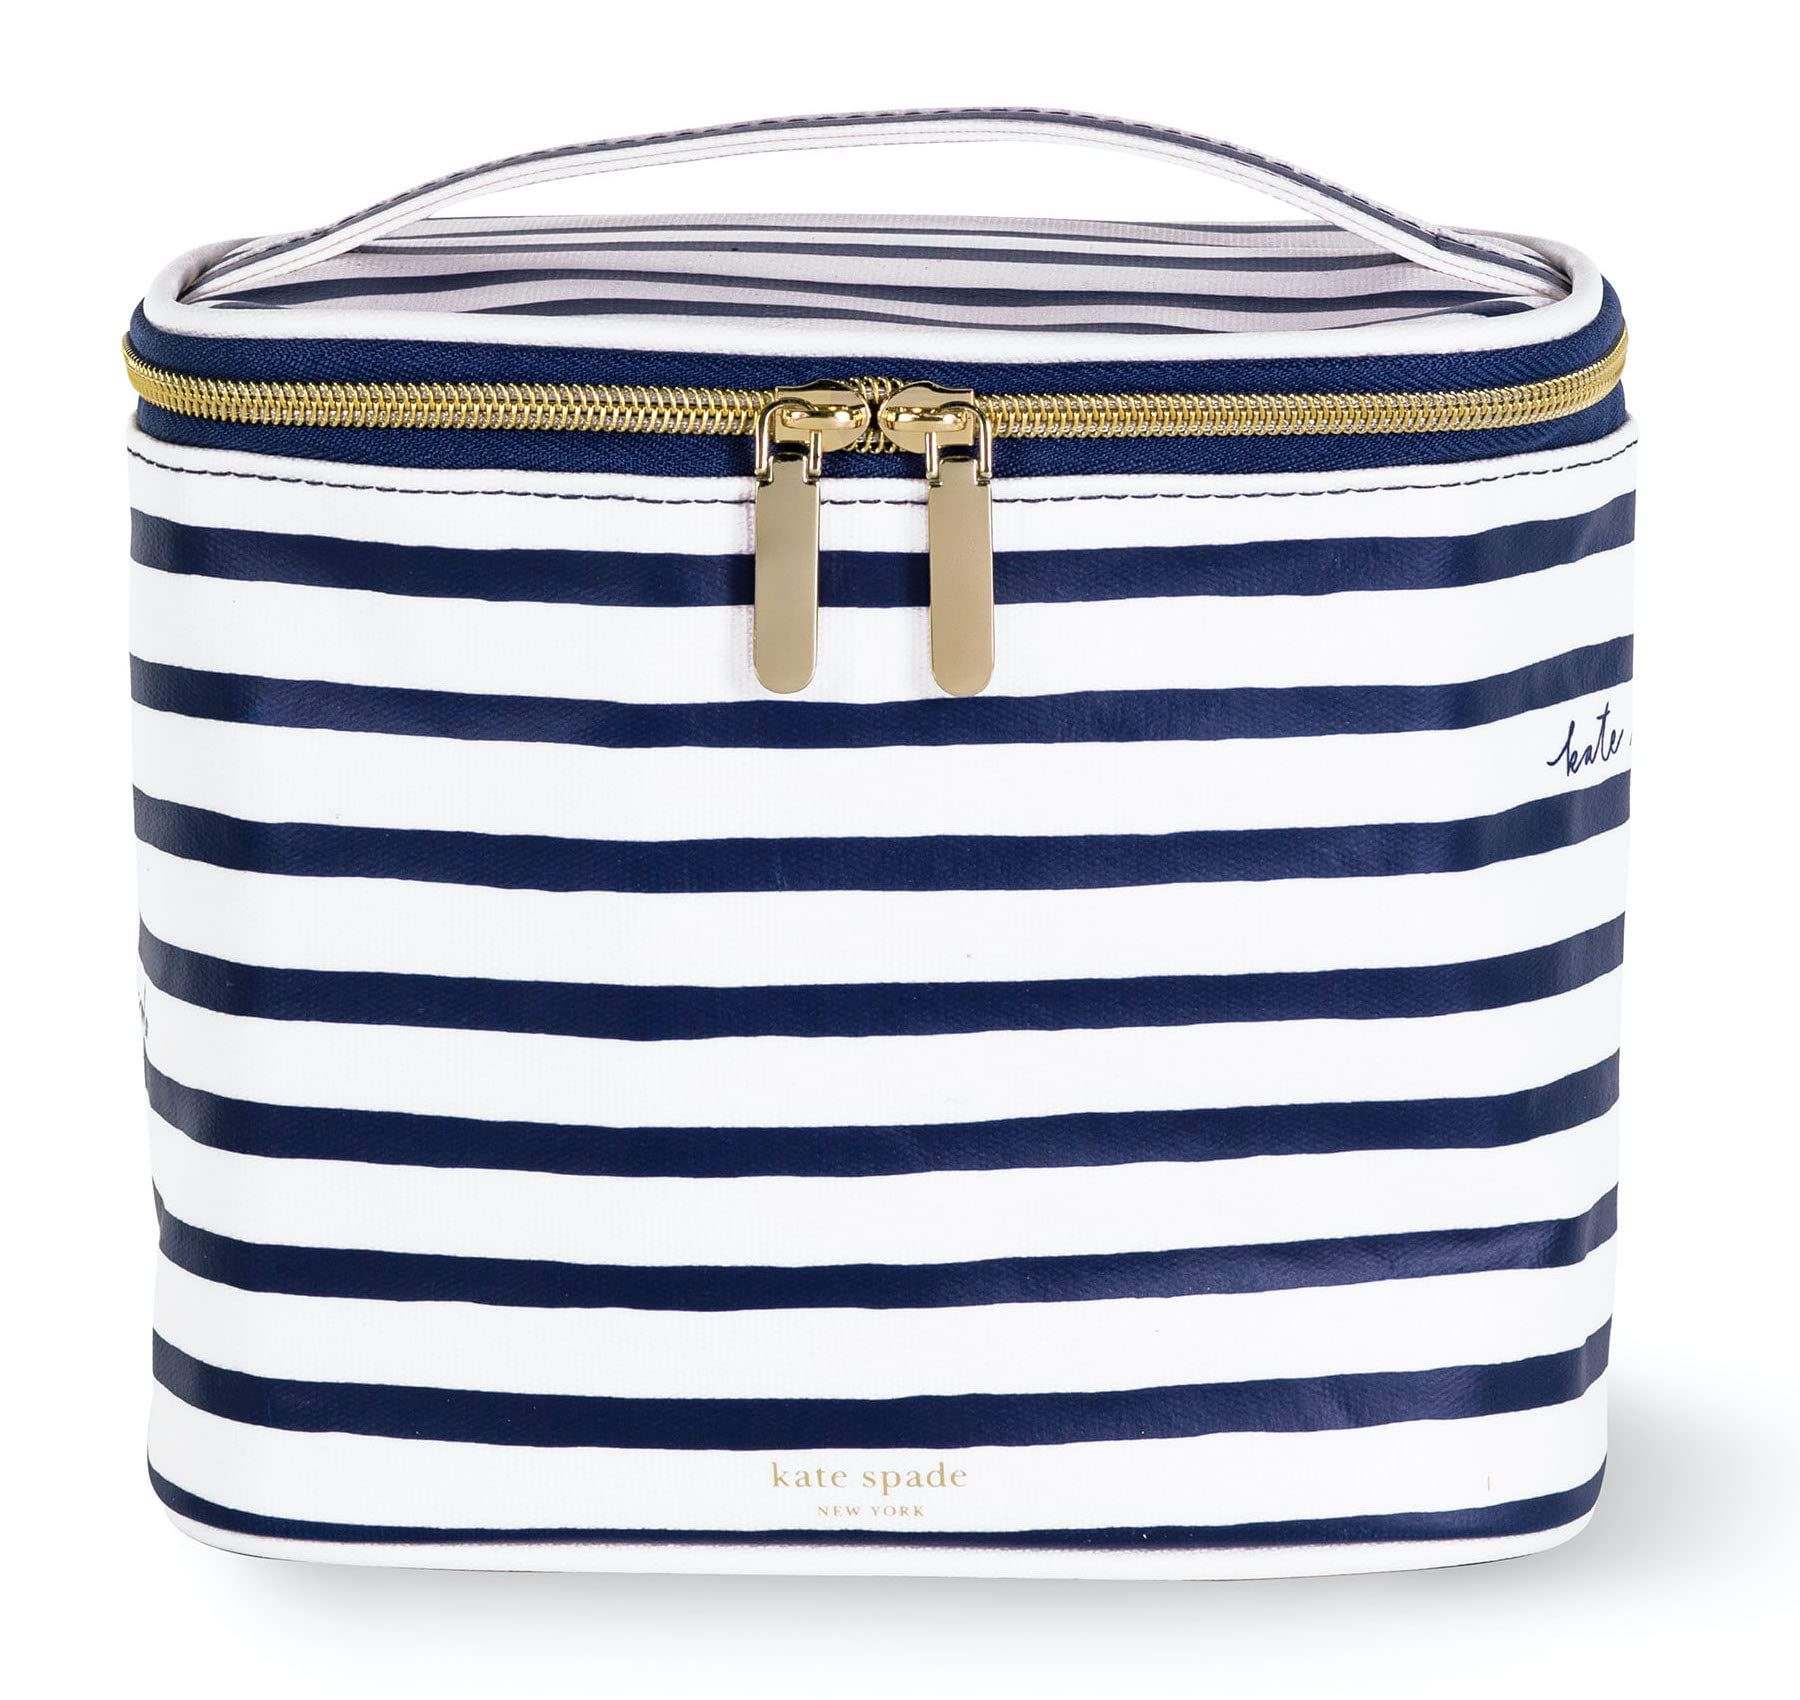 Kate Spade New York Insulated Lunch Tote, Small Lunch Cooler, Thermal Bag with Double Zipper Close a | Amazon (US)